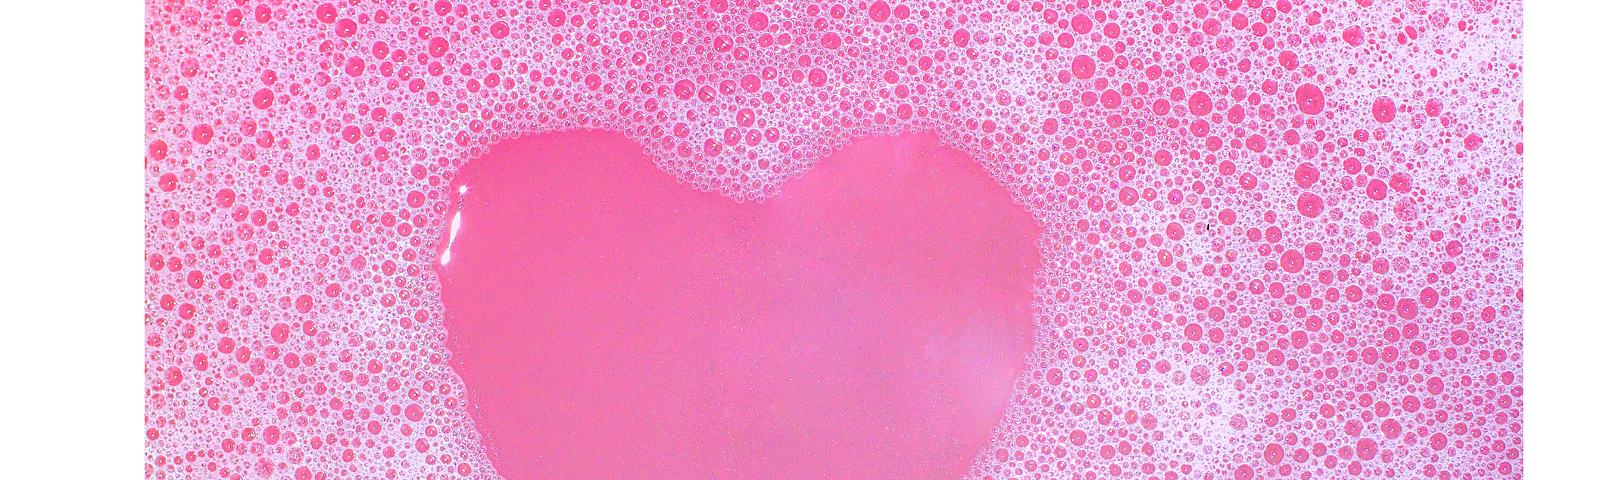 Soap bubbles shaped into a pink heart